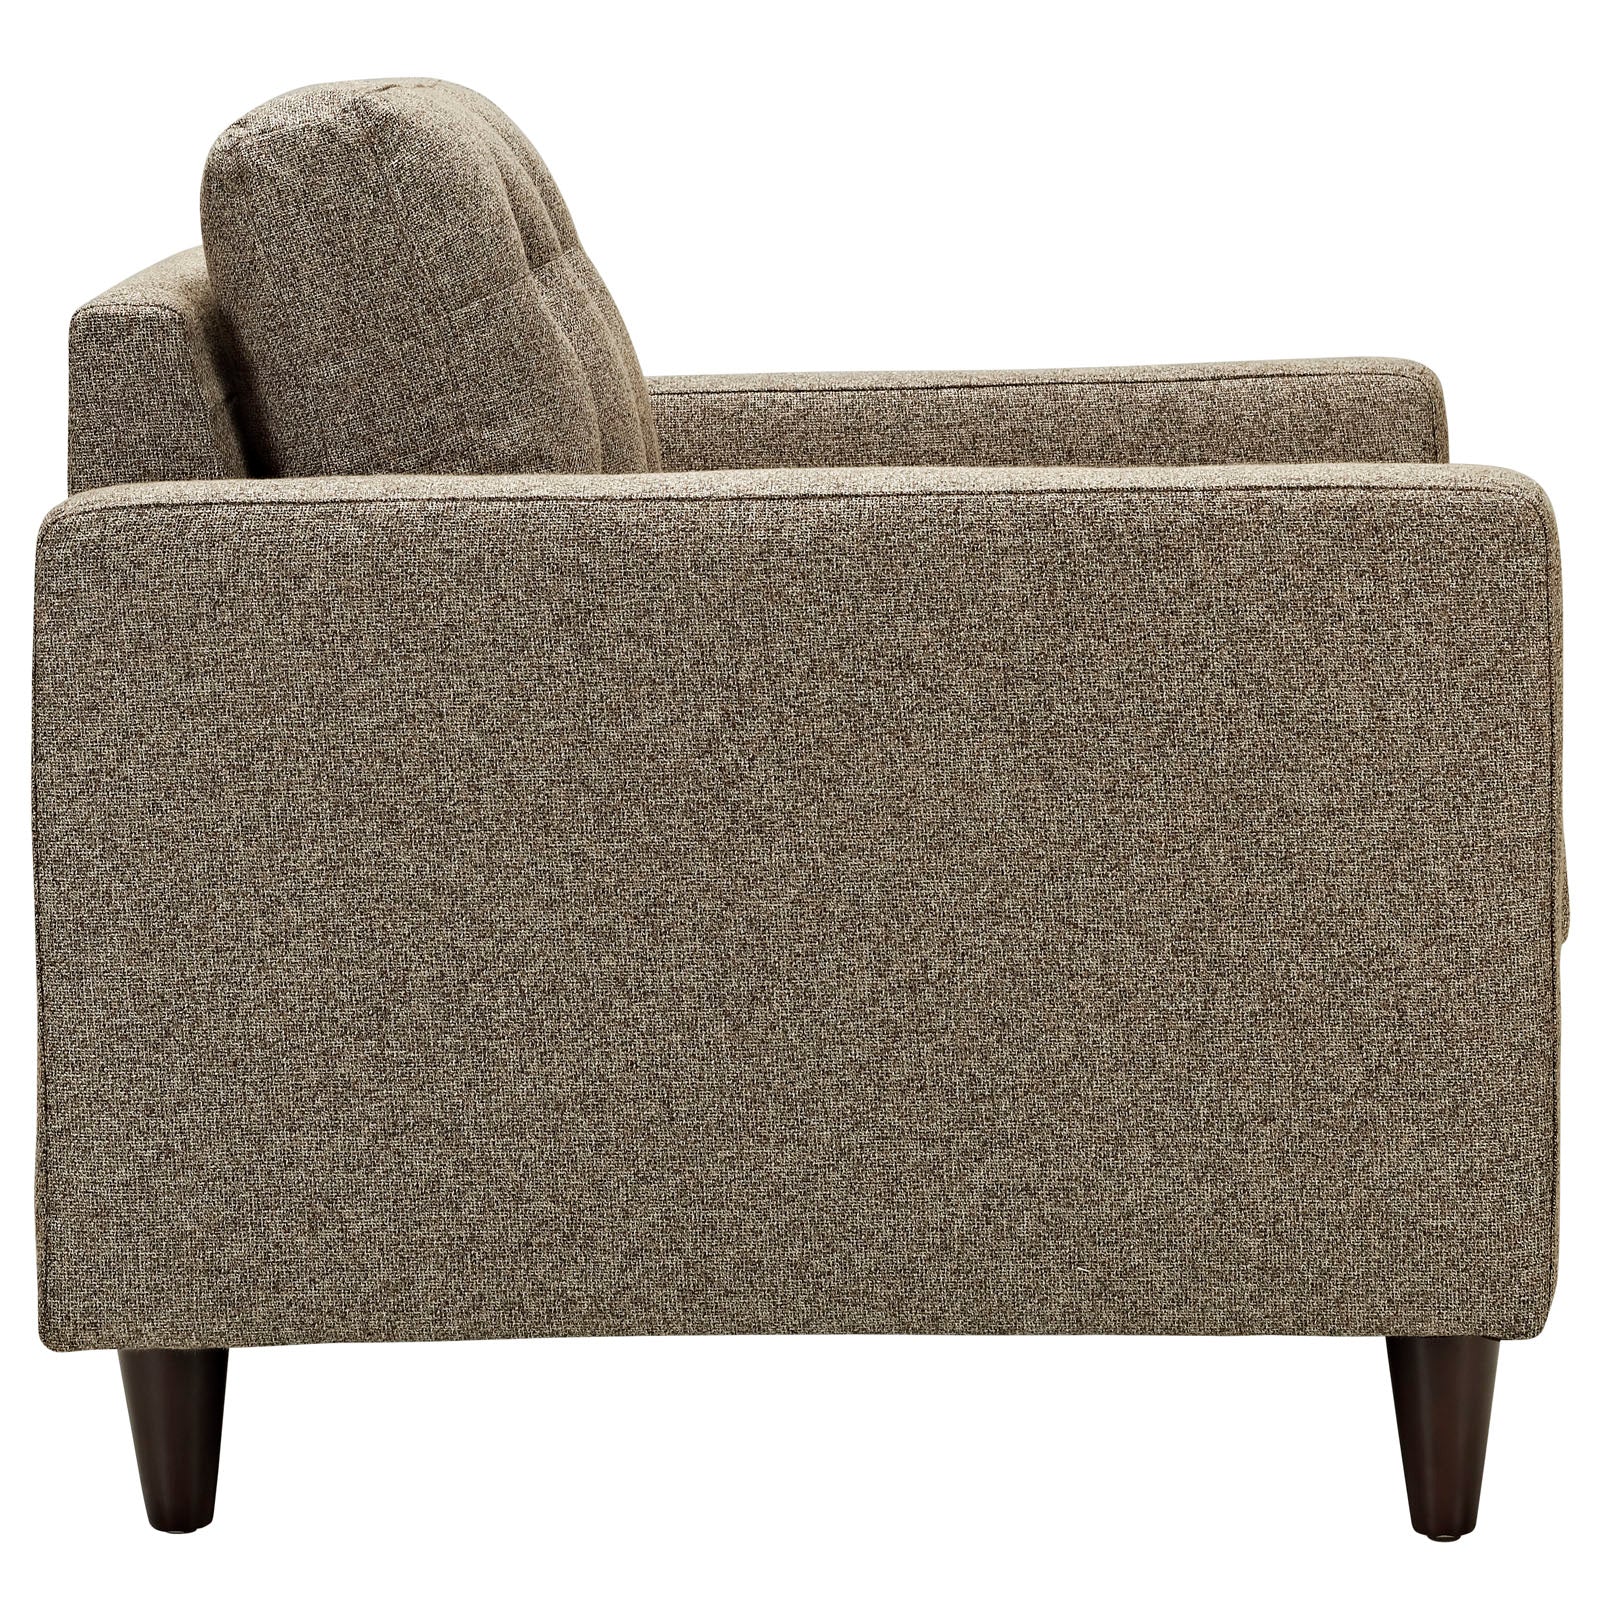 Modway Living Room Sets - Empress Armchair Upholstered Fabric Set Of 2 Oatmeal